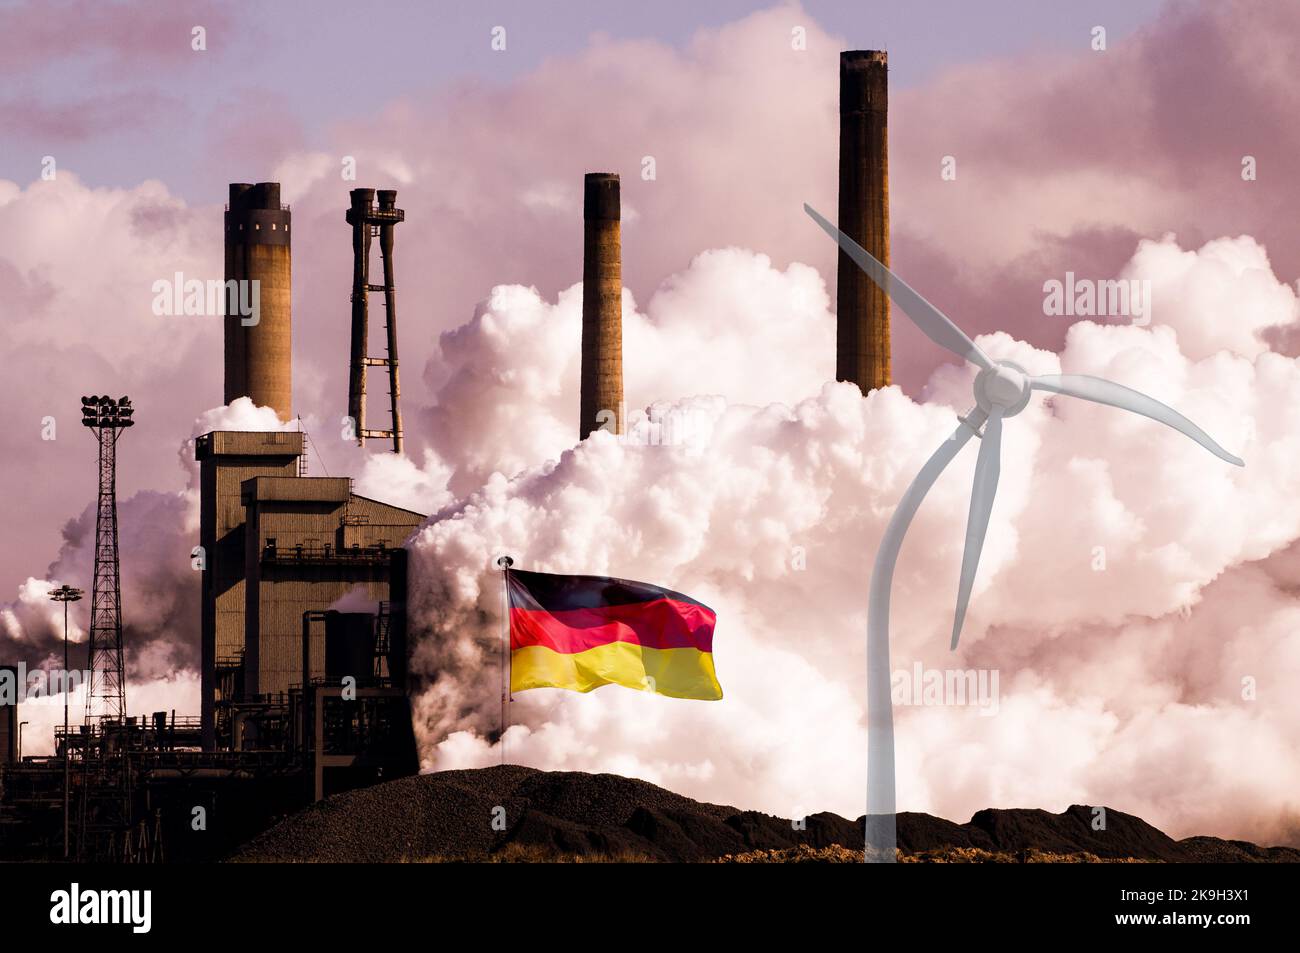 Flag of Germany, twisted wind turbine, steelworks. Fossil fuels, coal, energy, gas, crisis, prices, Russia, Russian gas... concept Stock Photo